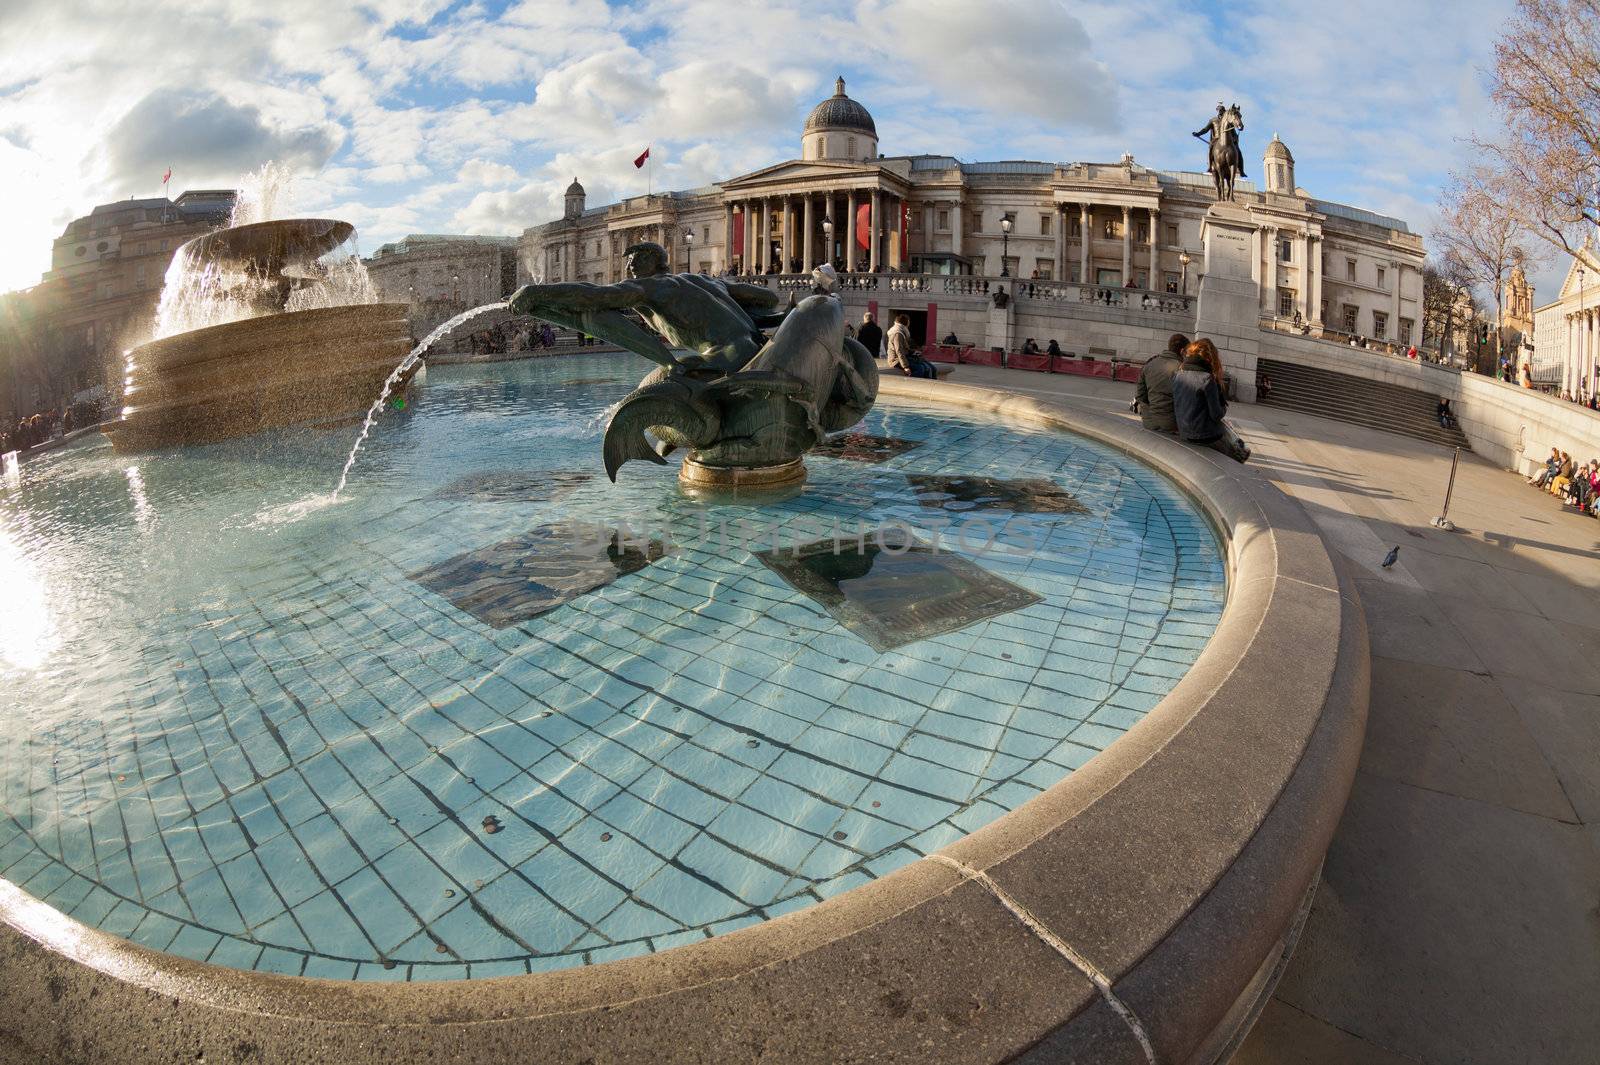 Trafalgar Square fountain in London, United Kingdom. Shot taken fisheye wide angle lens, which highlights the curvilinear architectural forms and round pool fountain in front